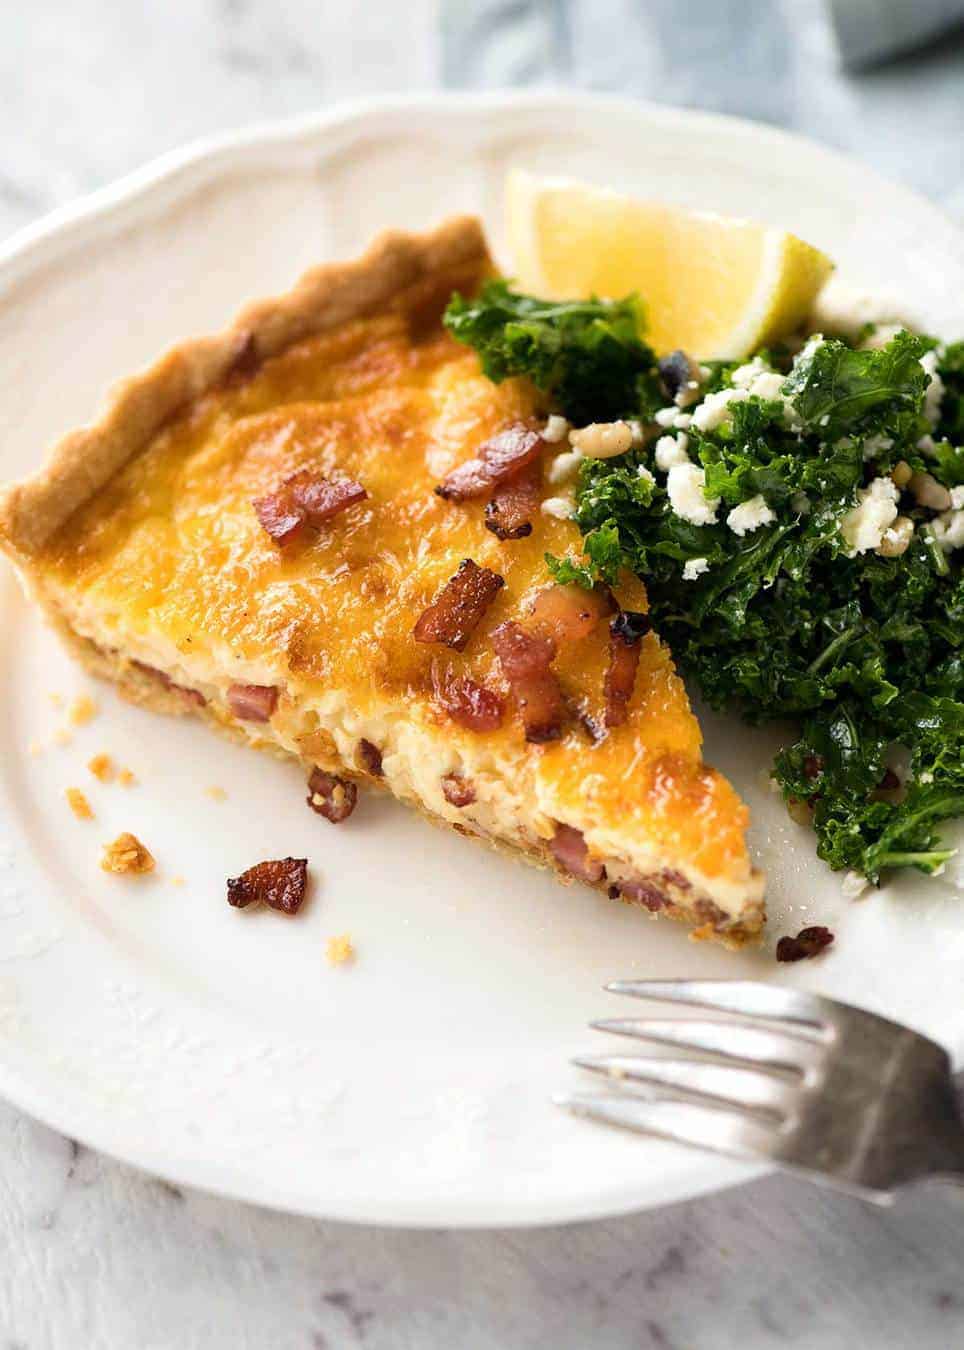 A slice of Quiche Lorraine on a plate, ready to be eaten.